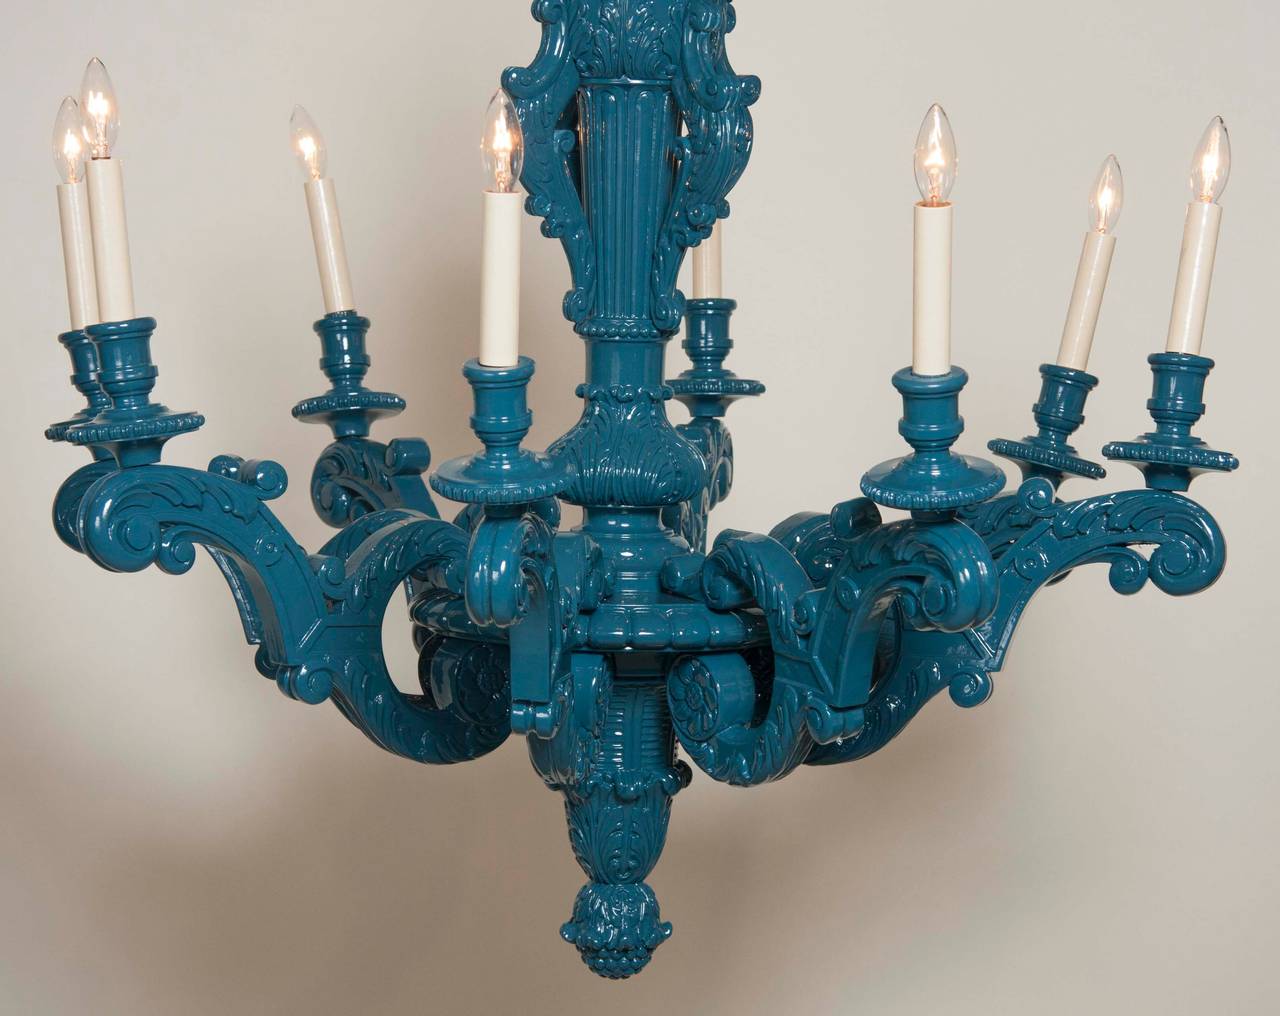 A turn of the century Louis XIV style wooden chandelier, lacquered in blue and rewired.